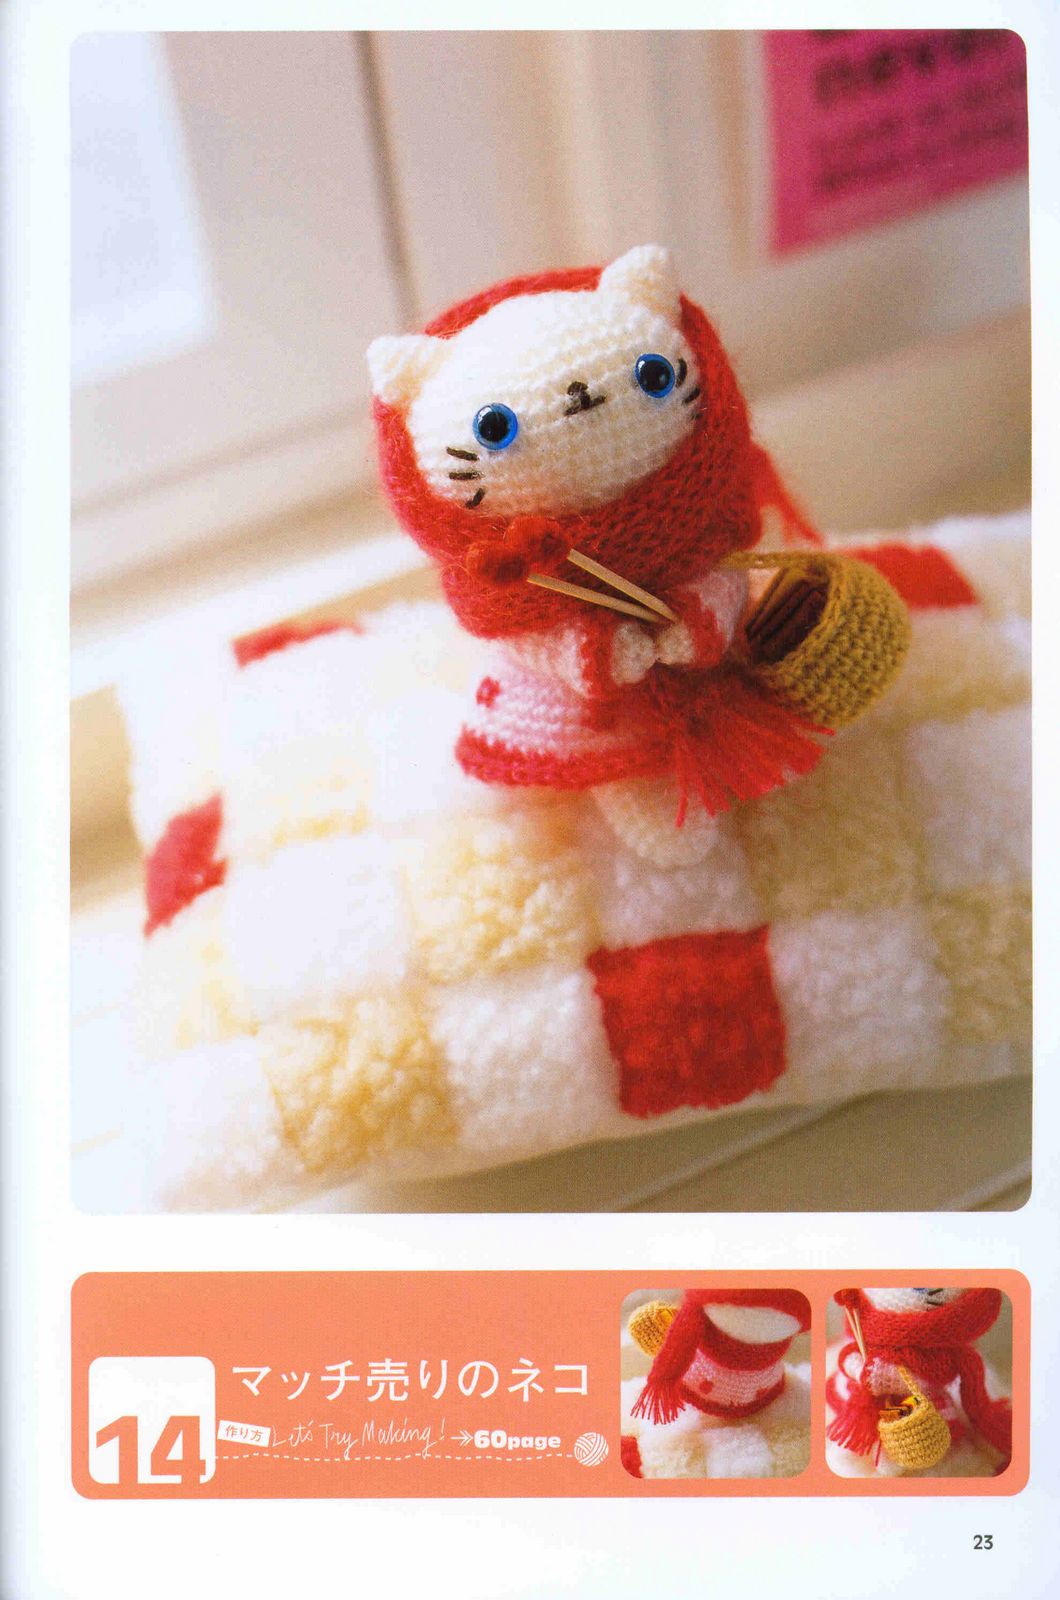 White kitty with red dress and basket amigurumi pattern (1)